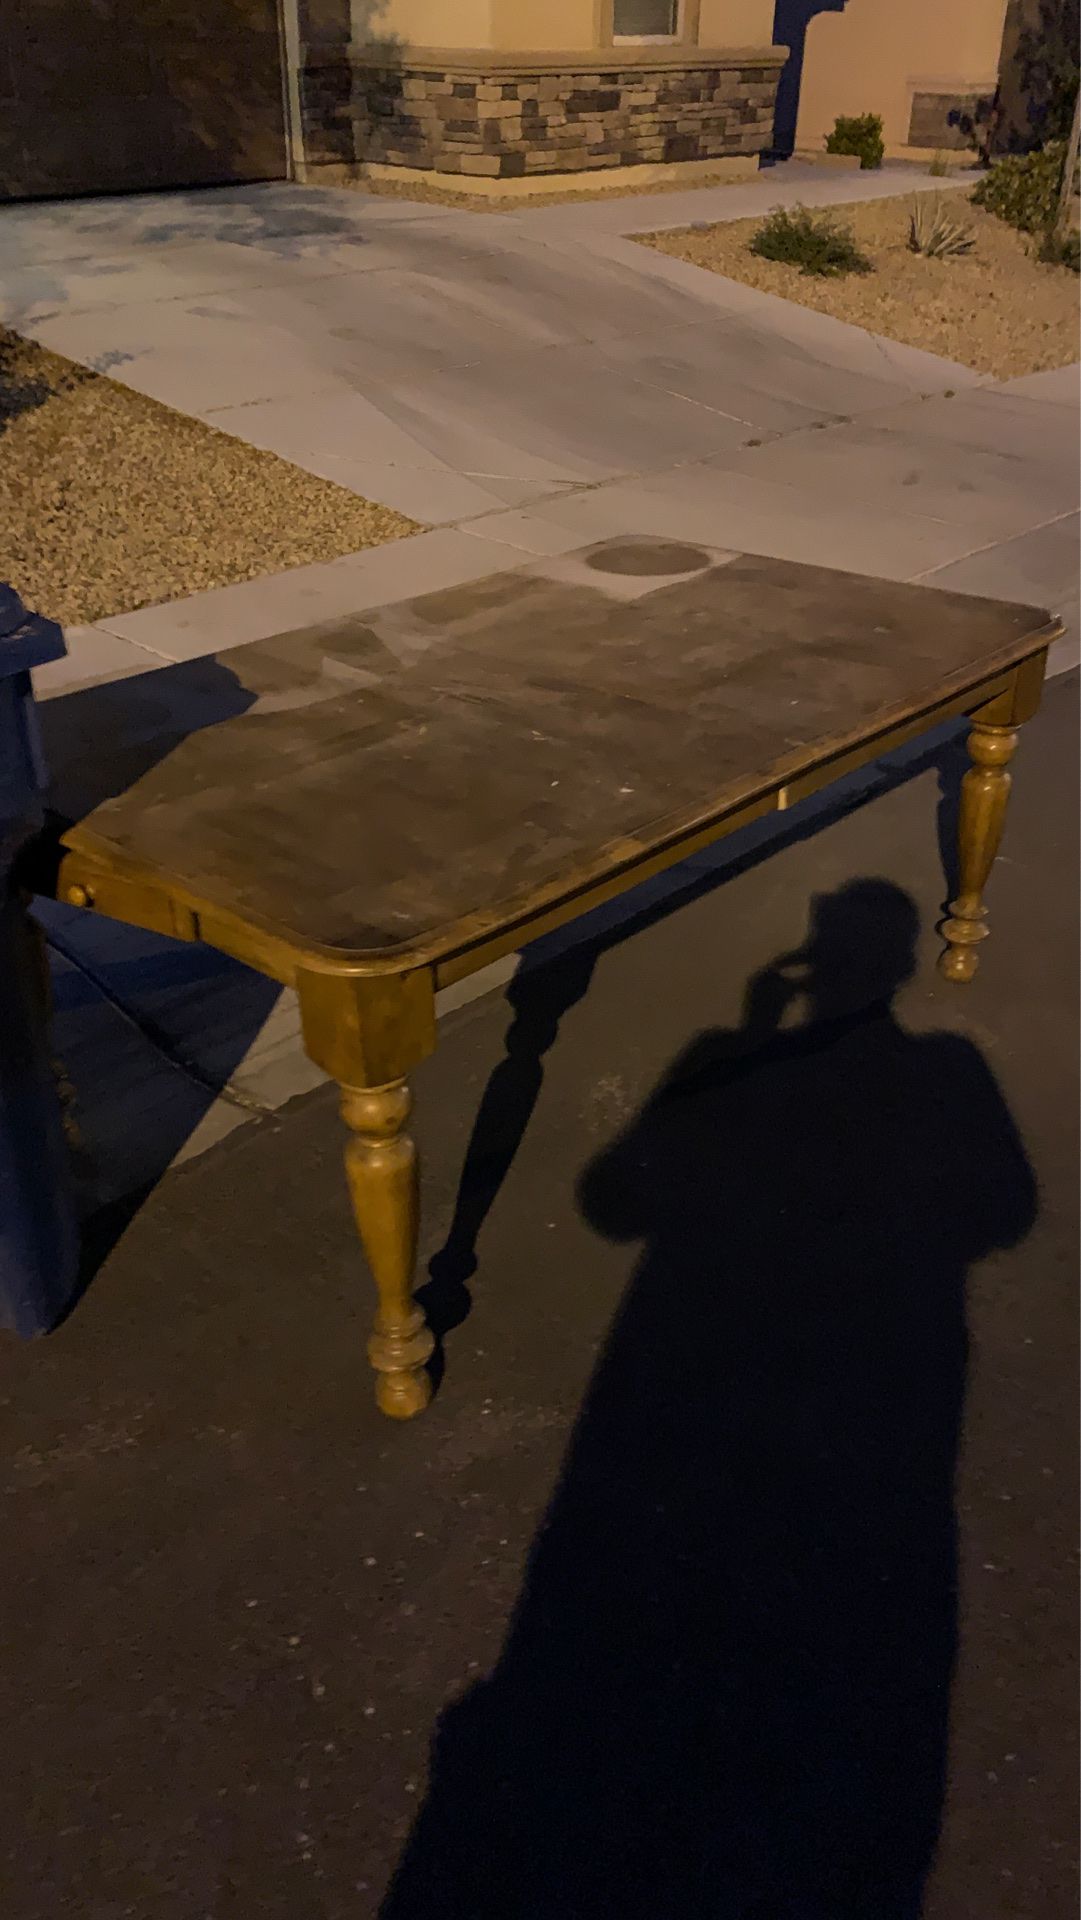 Free dining table